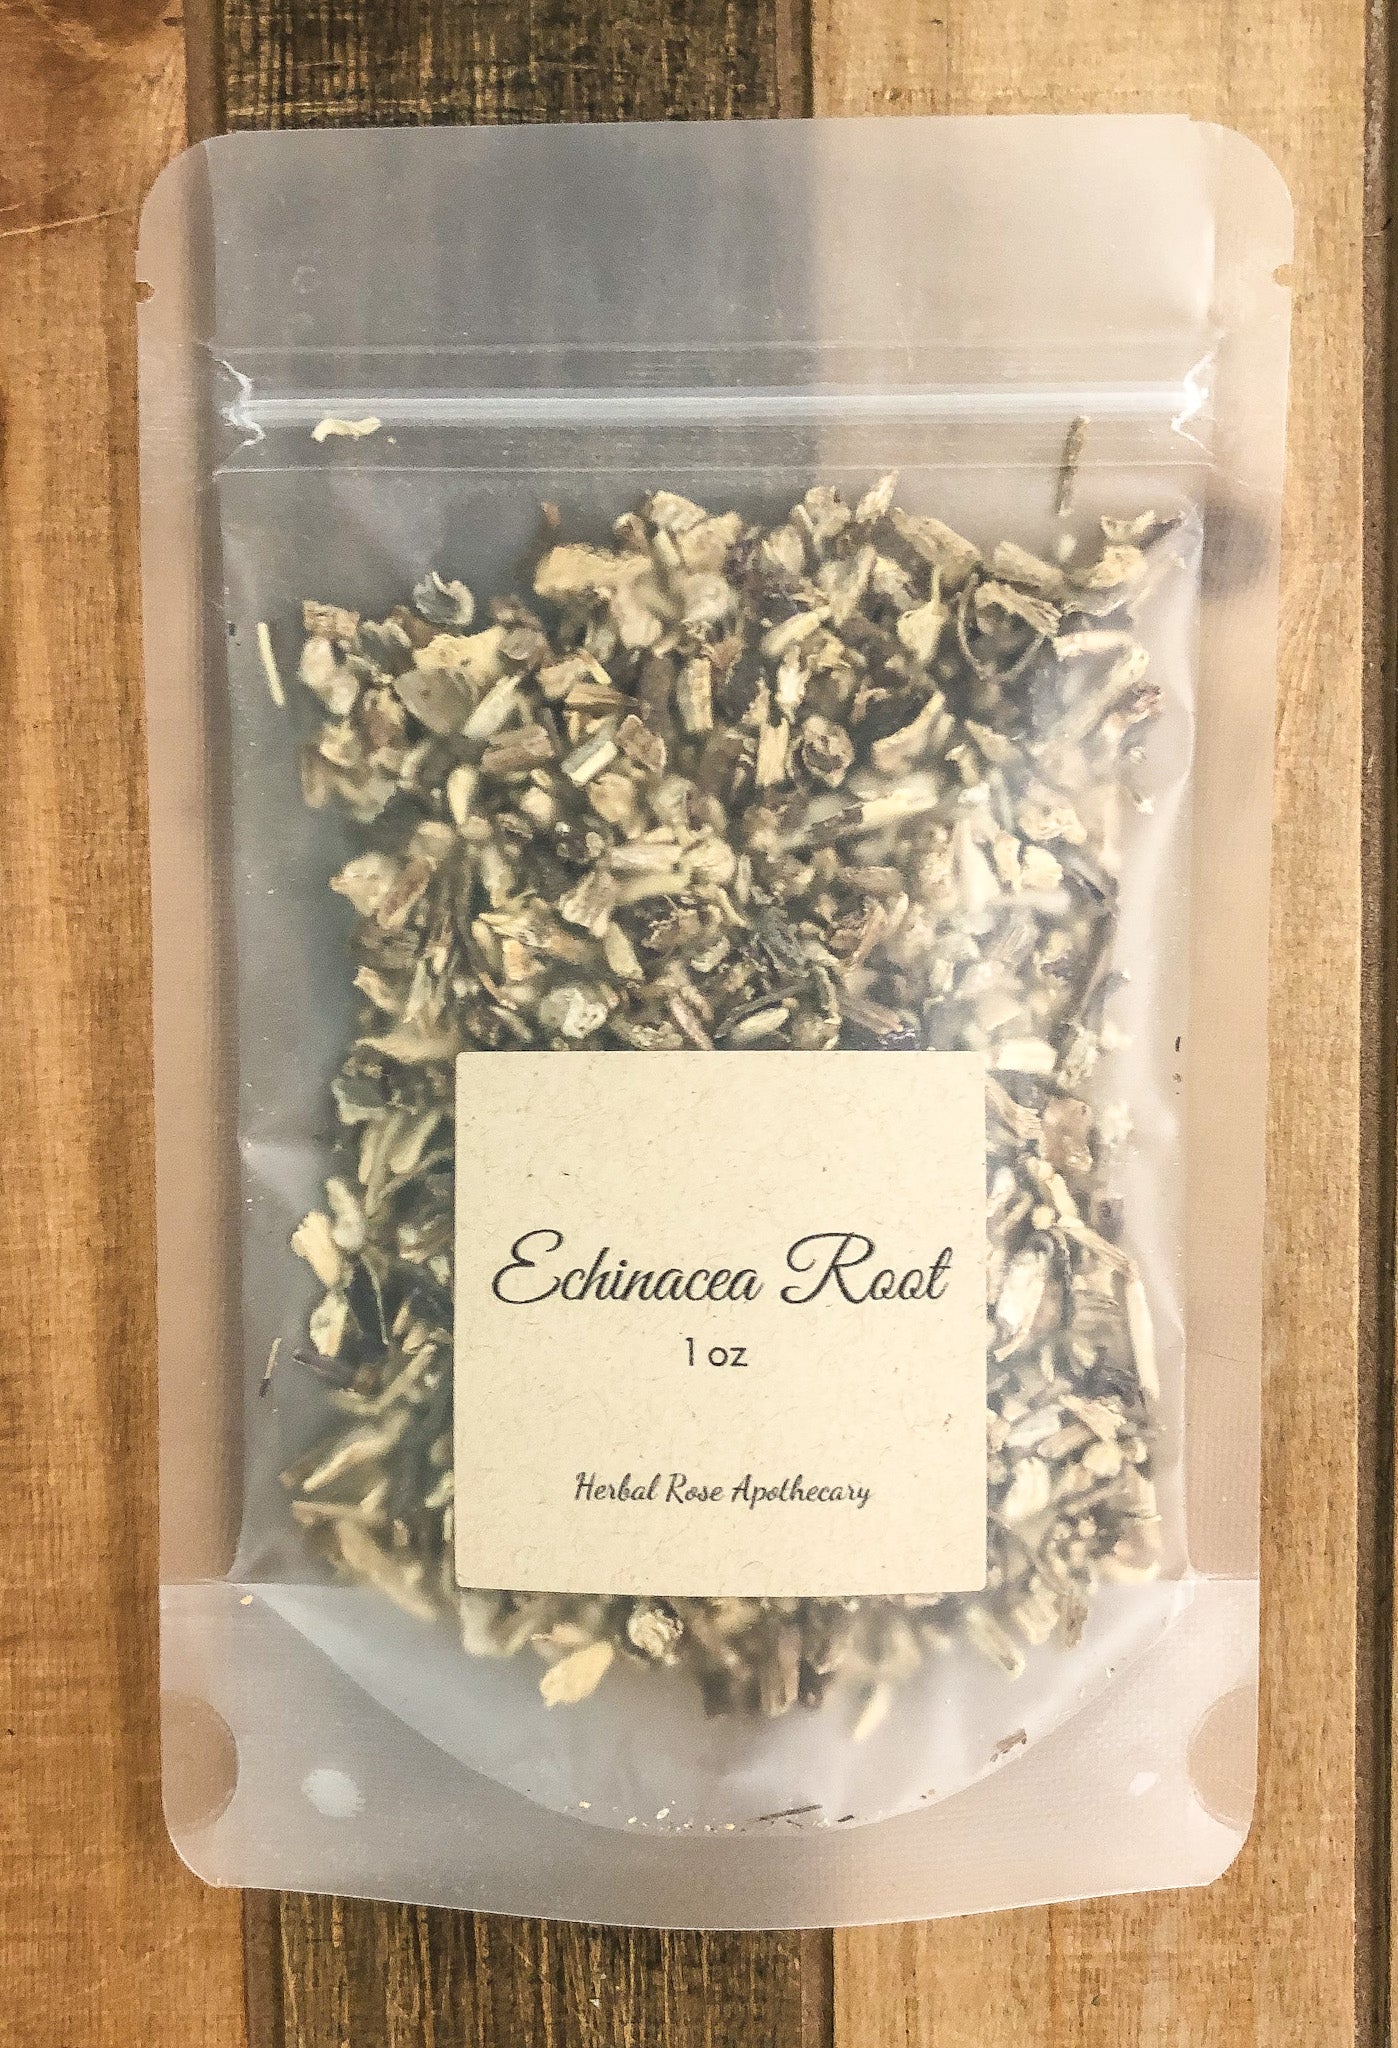 1oz bag of dried echinacea root in a clear plastic bag with a wooden background